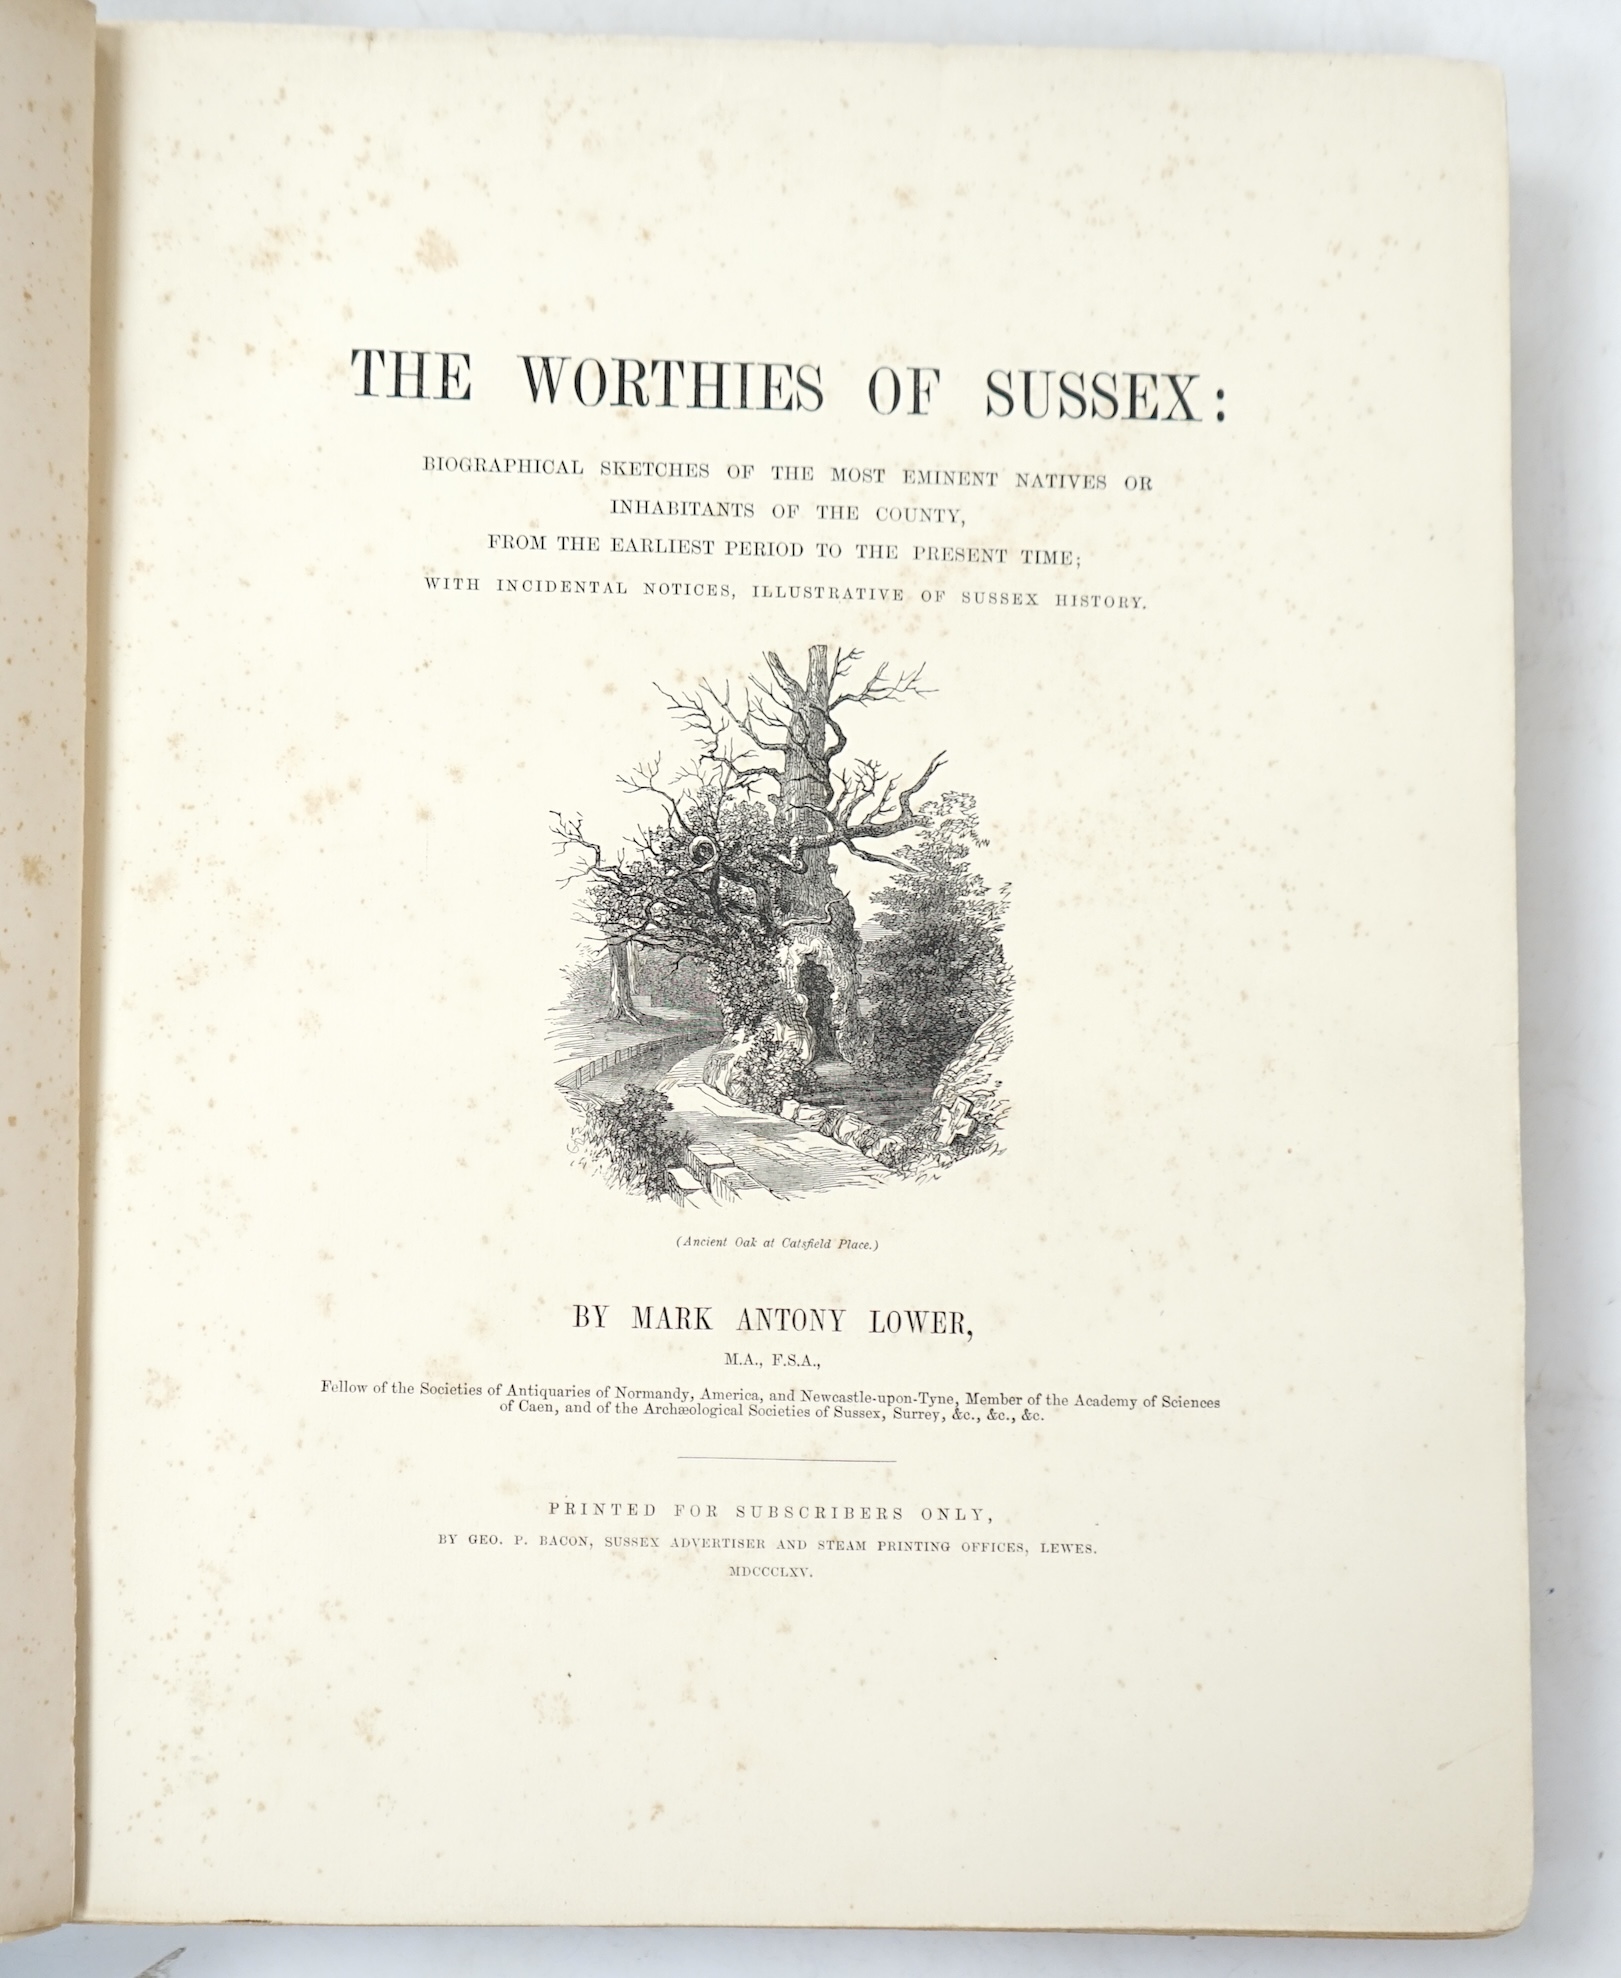 Lower, Mark Antony - The Worthies of Sussex: Biographical Sketches of the Most Eminent Natives of Inhabitants of the County, large 4to, cloth, coloured lithograph frontispiece and 7 uncoloured plates, Lewes, 1865 and Pag